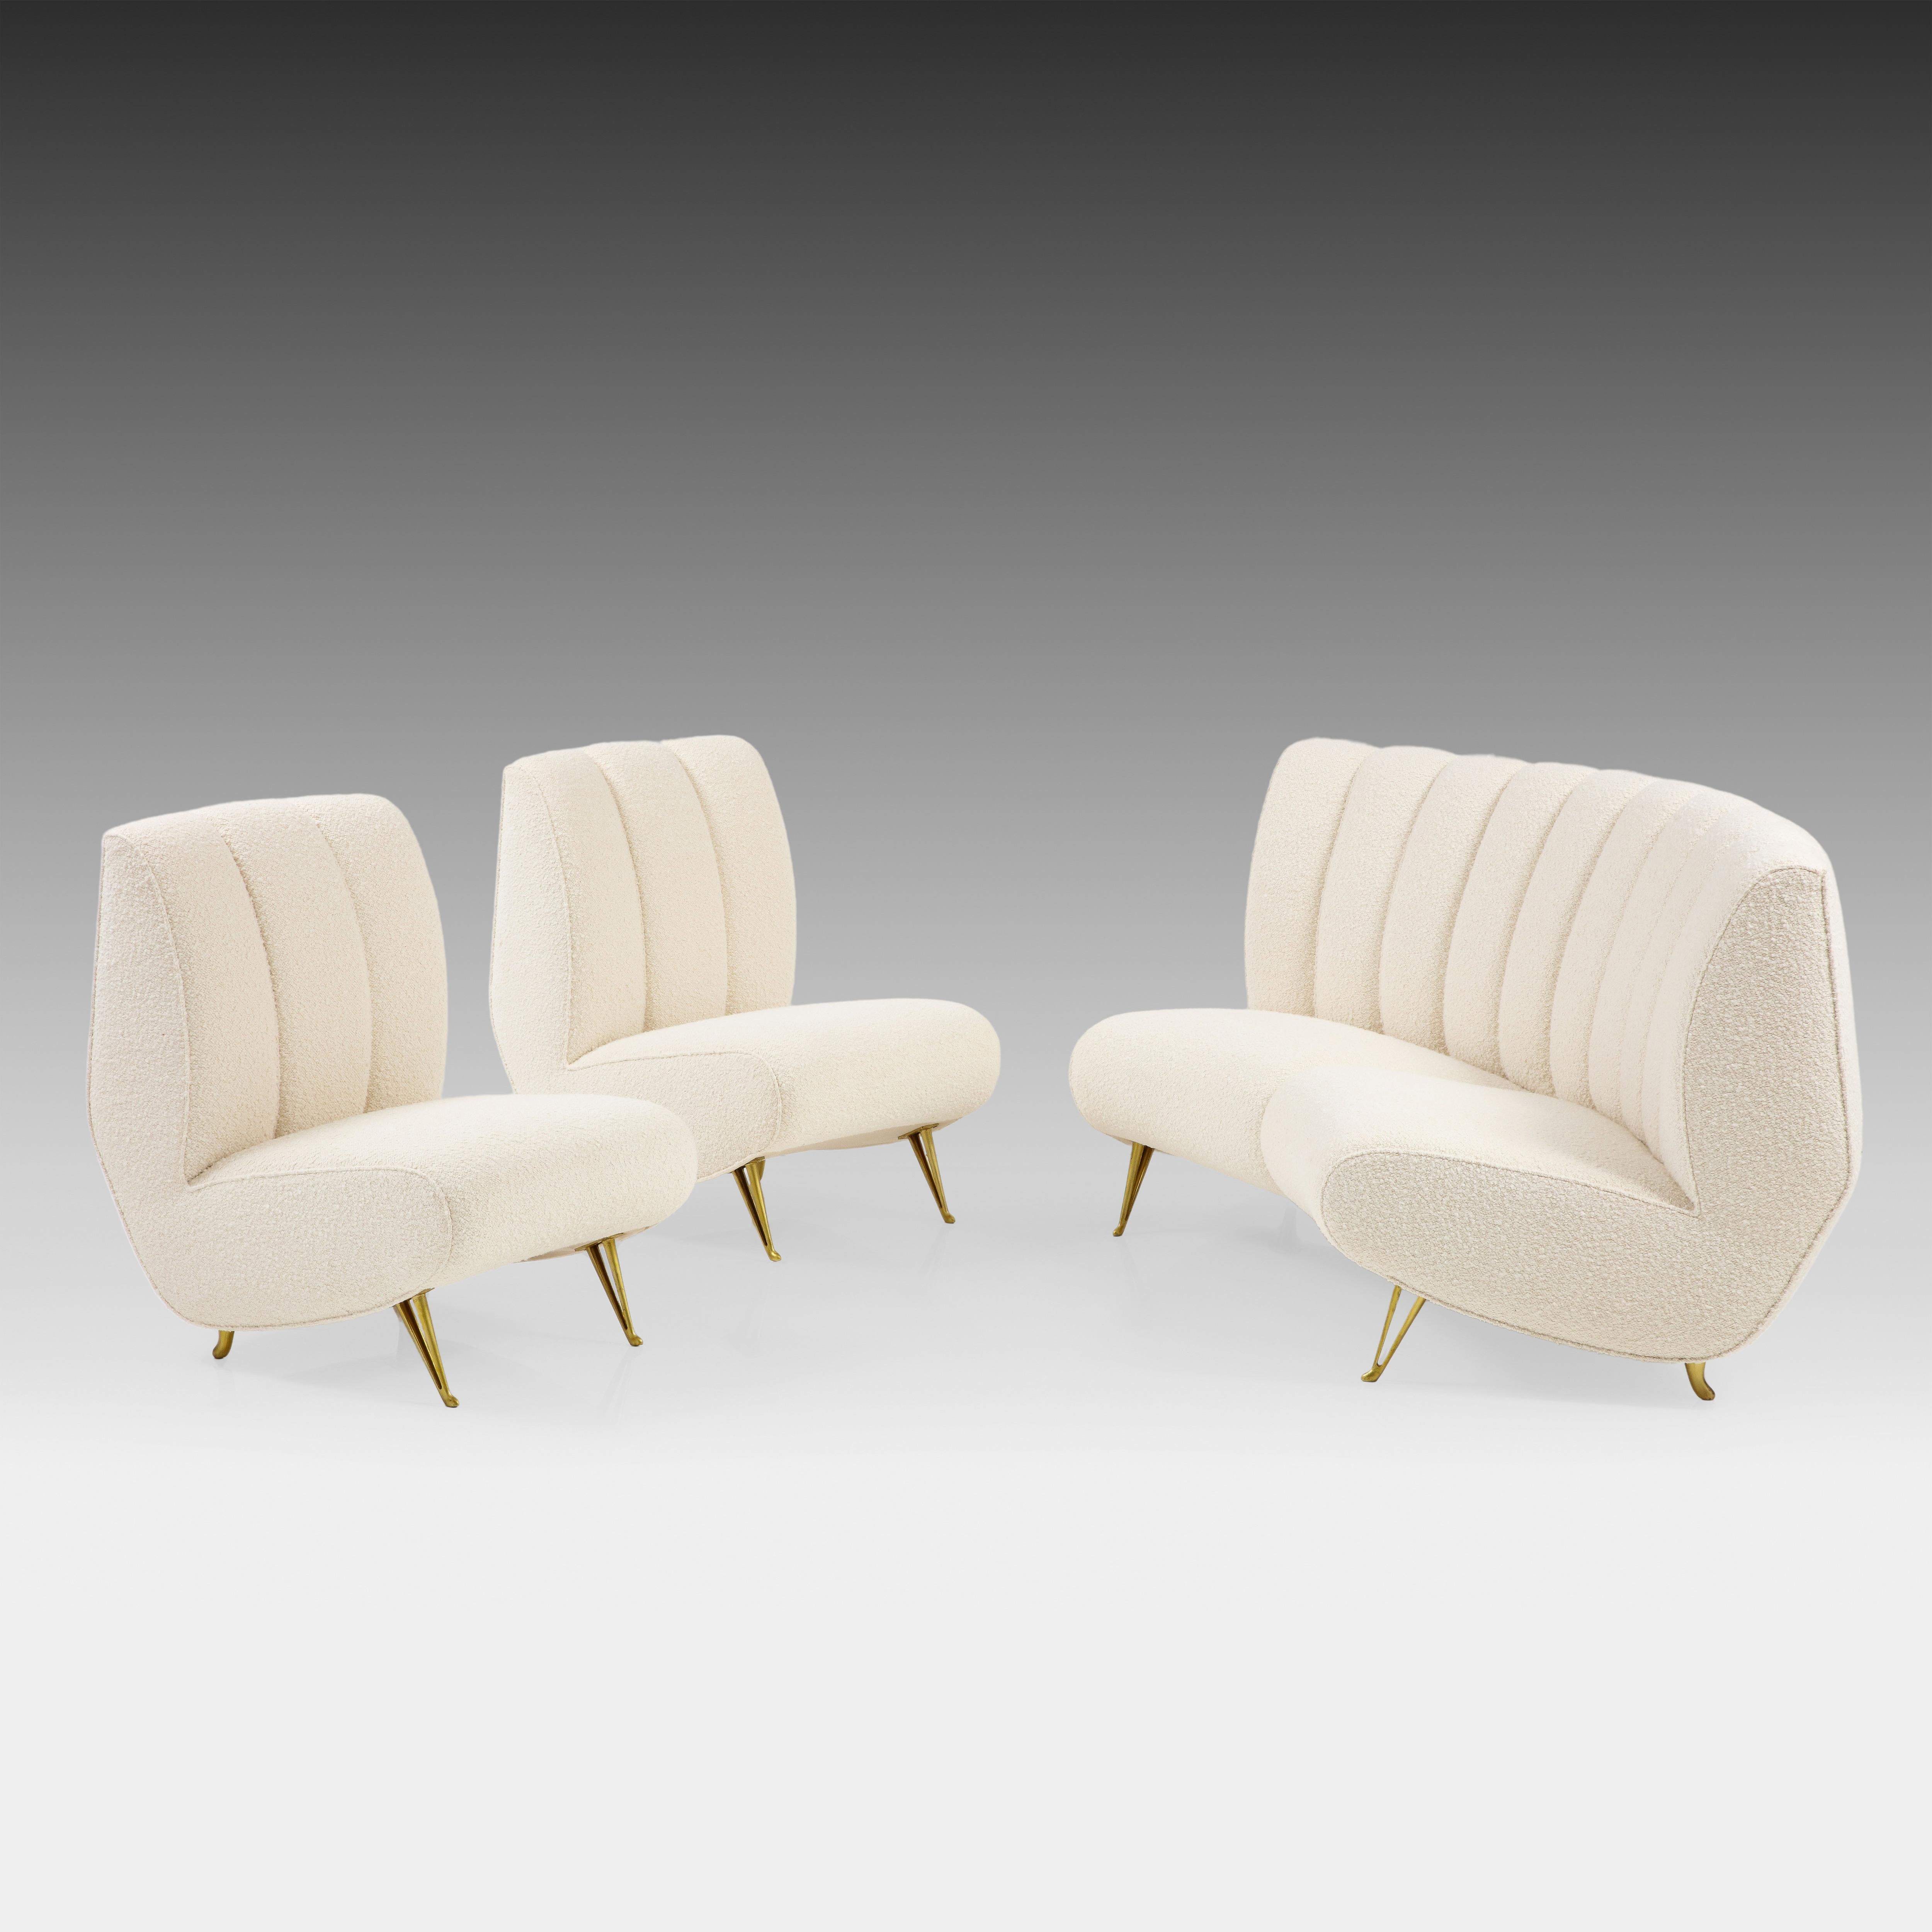 ISA Bergamo Rare Pair of Lounge or Slipper Chairs in Ivory Bouclé, Italy, 1950s For Sale 4